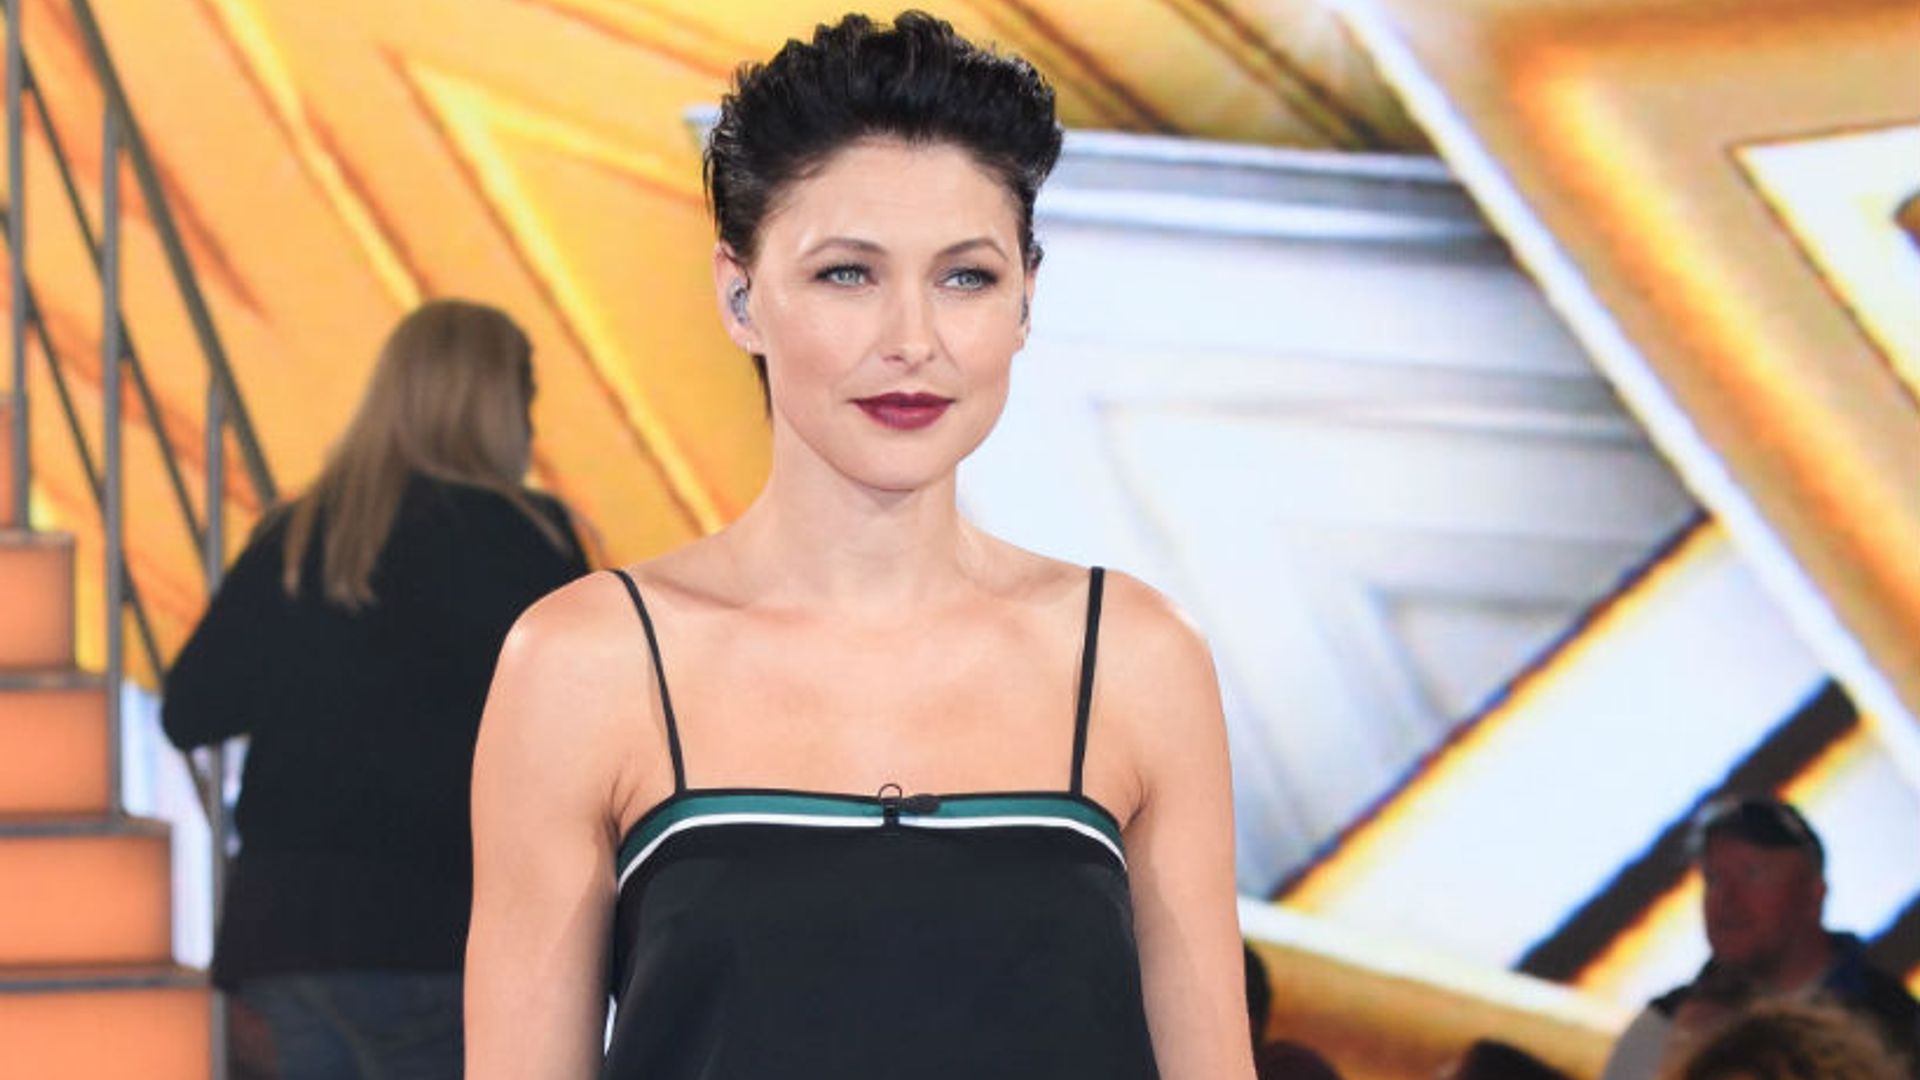 Emma Willis wears stylish Victoria Beckham two-piece while on presenting duties